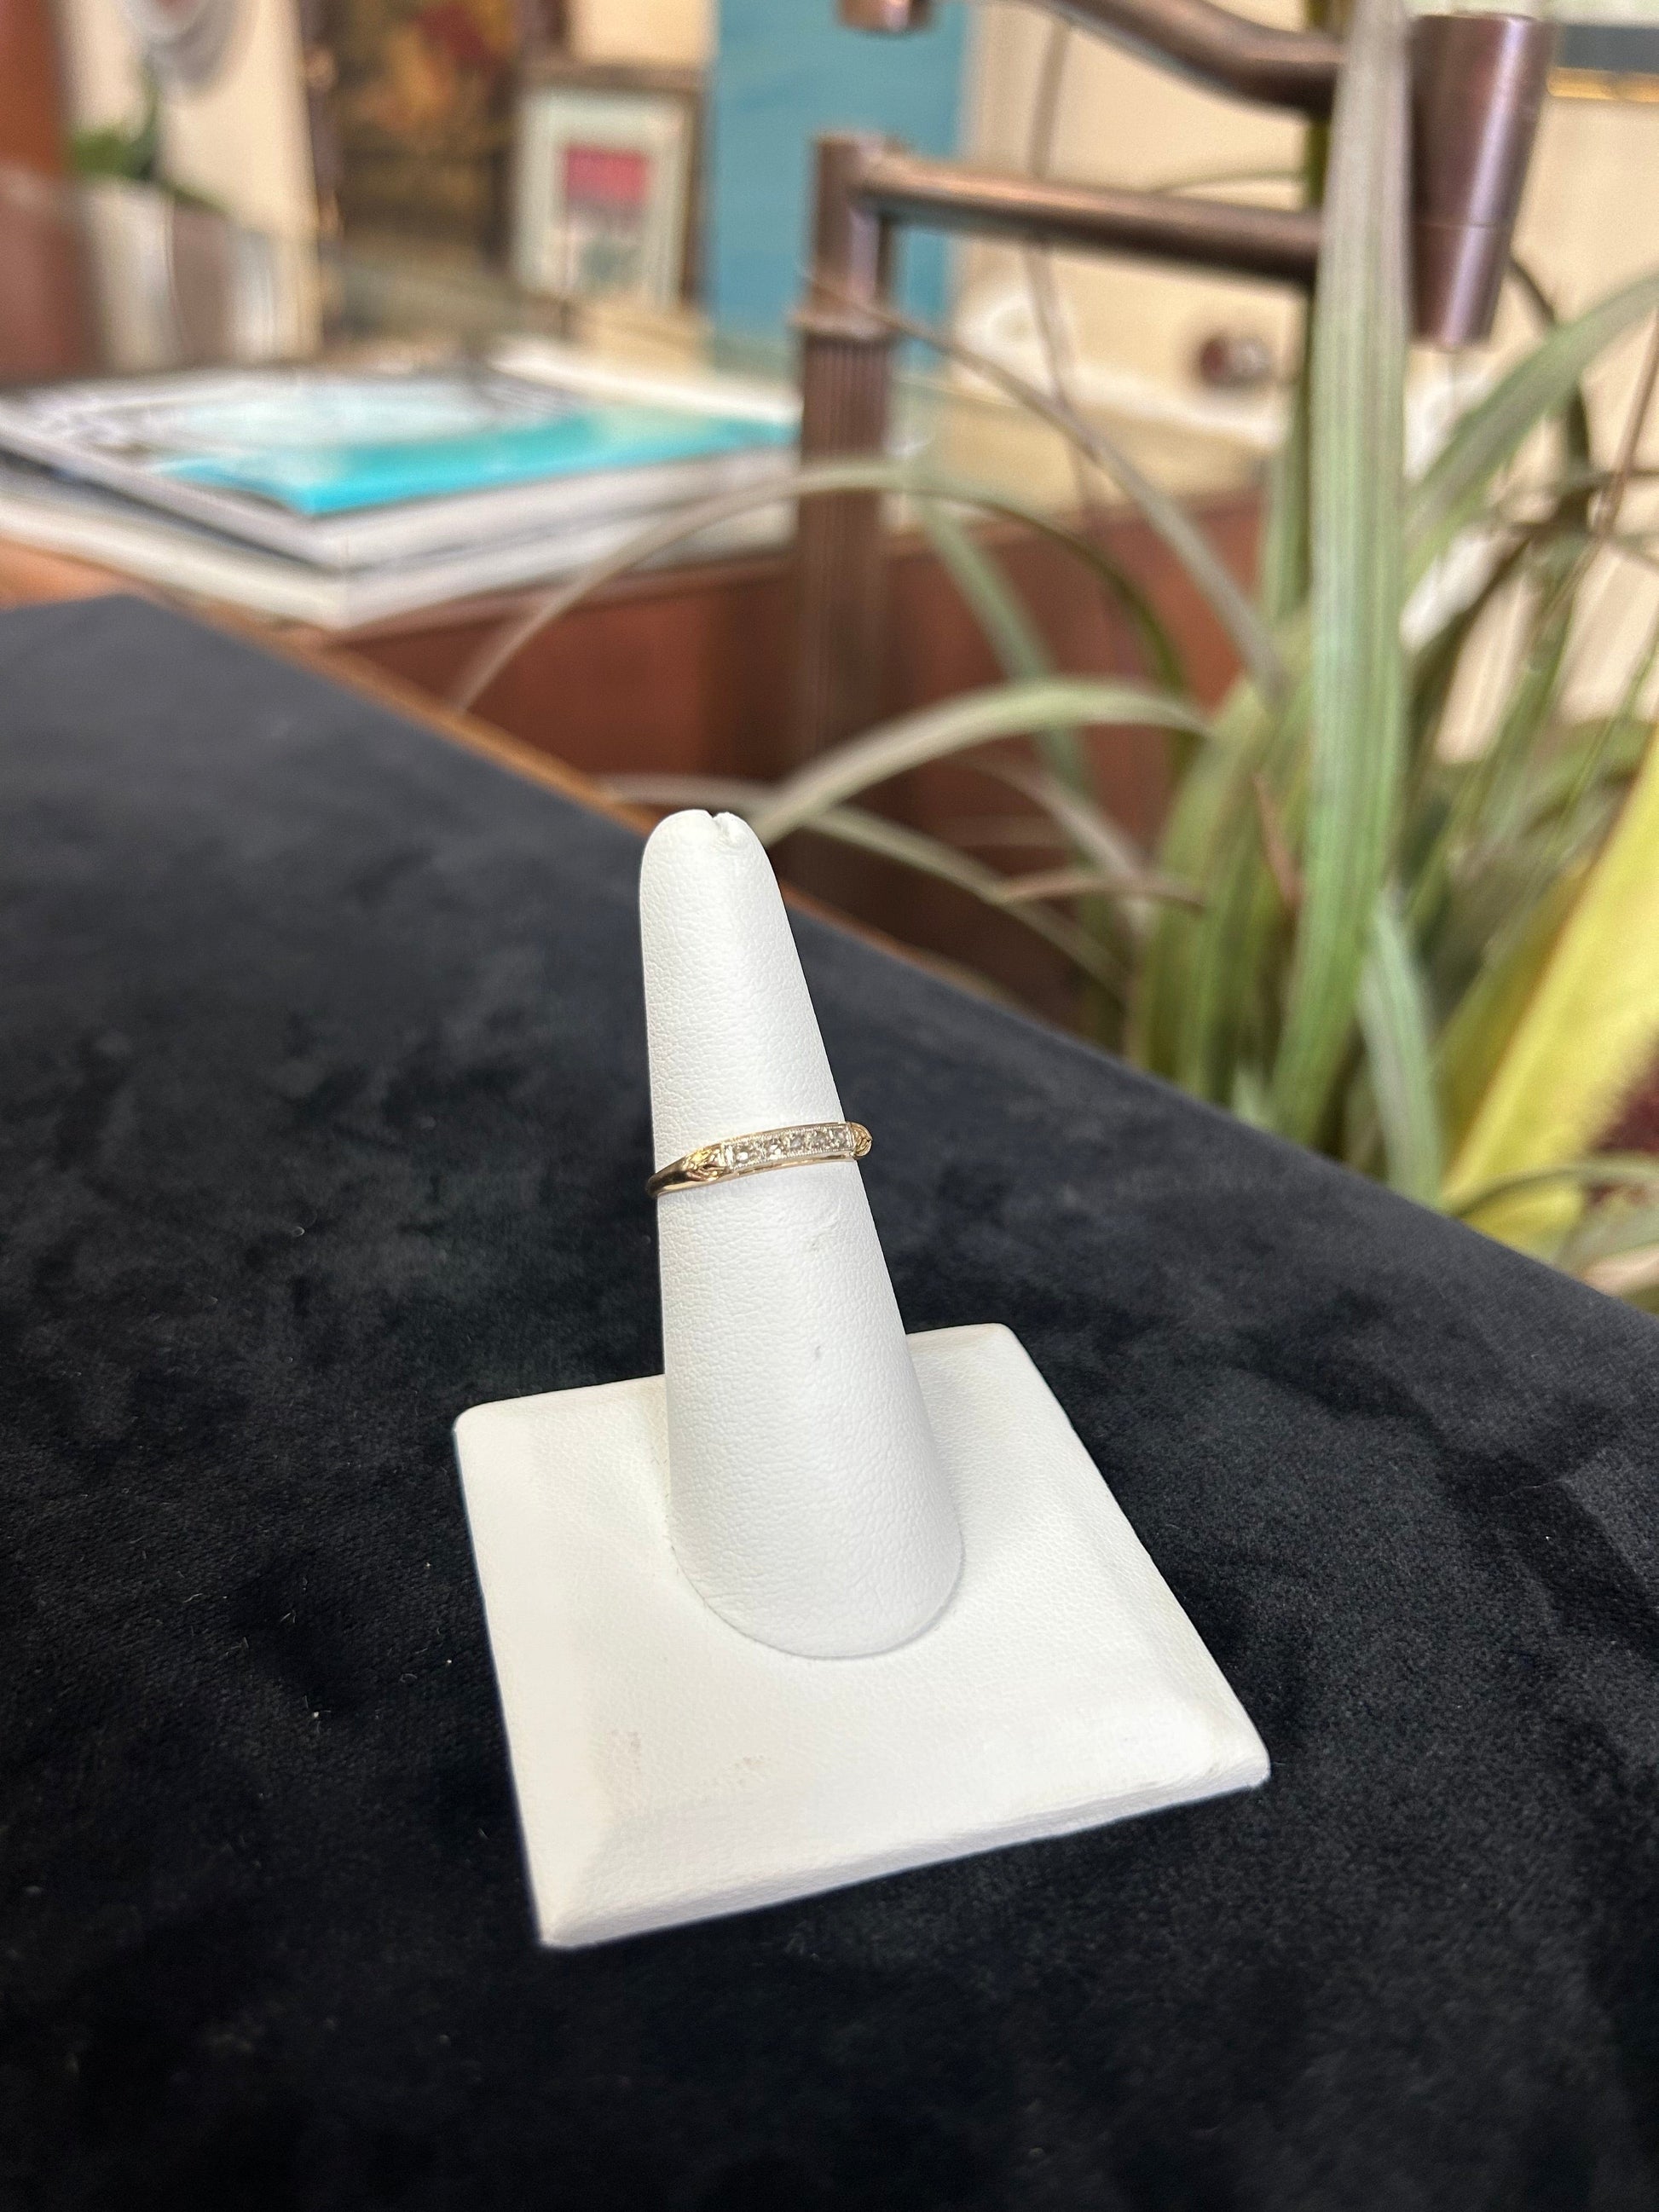 a white object with a ring on top of it